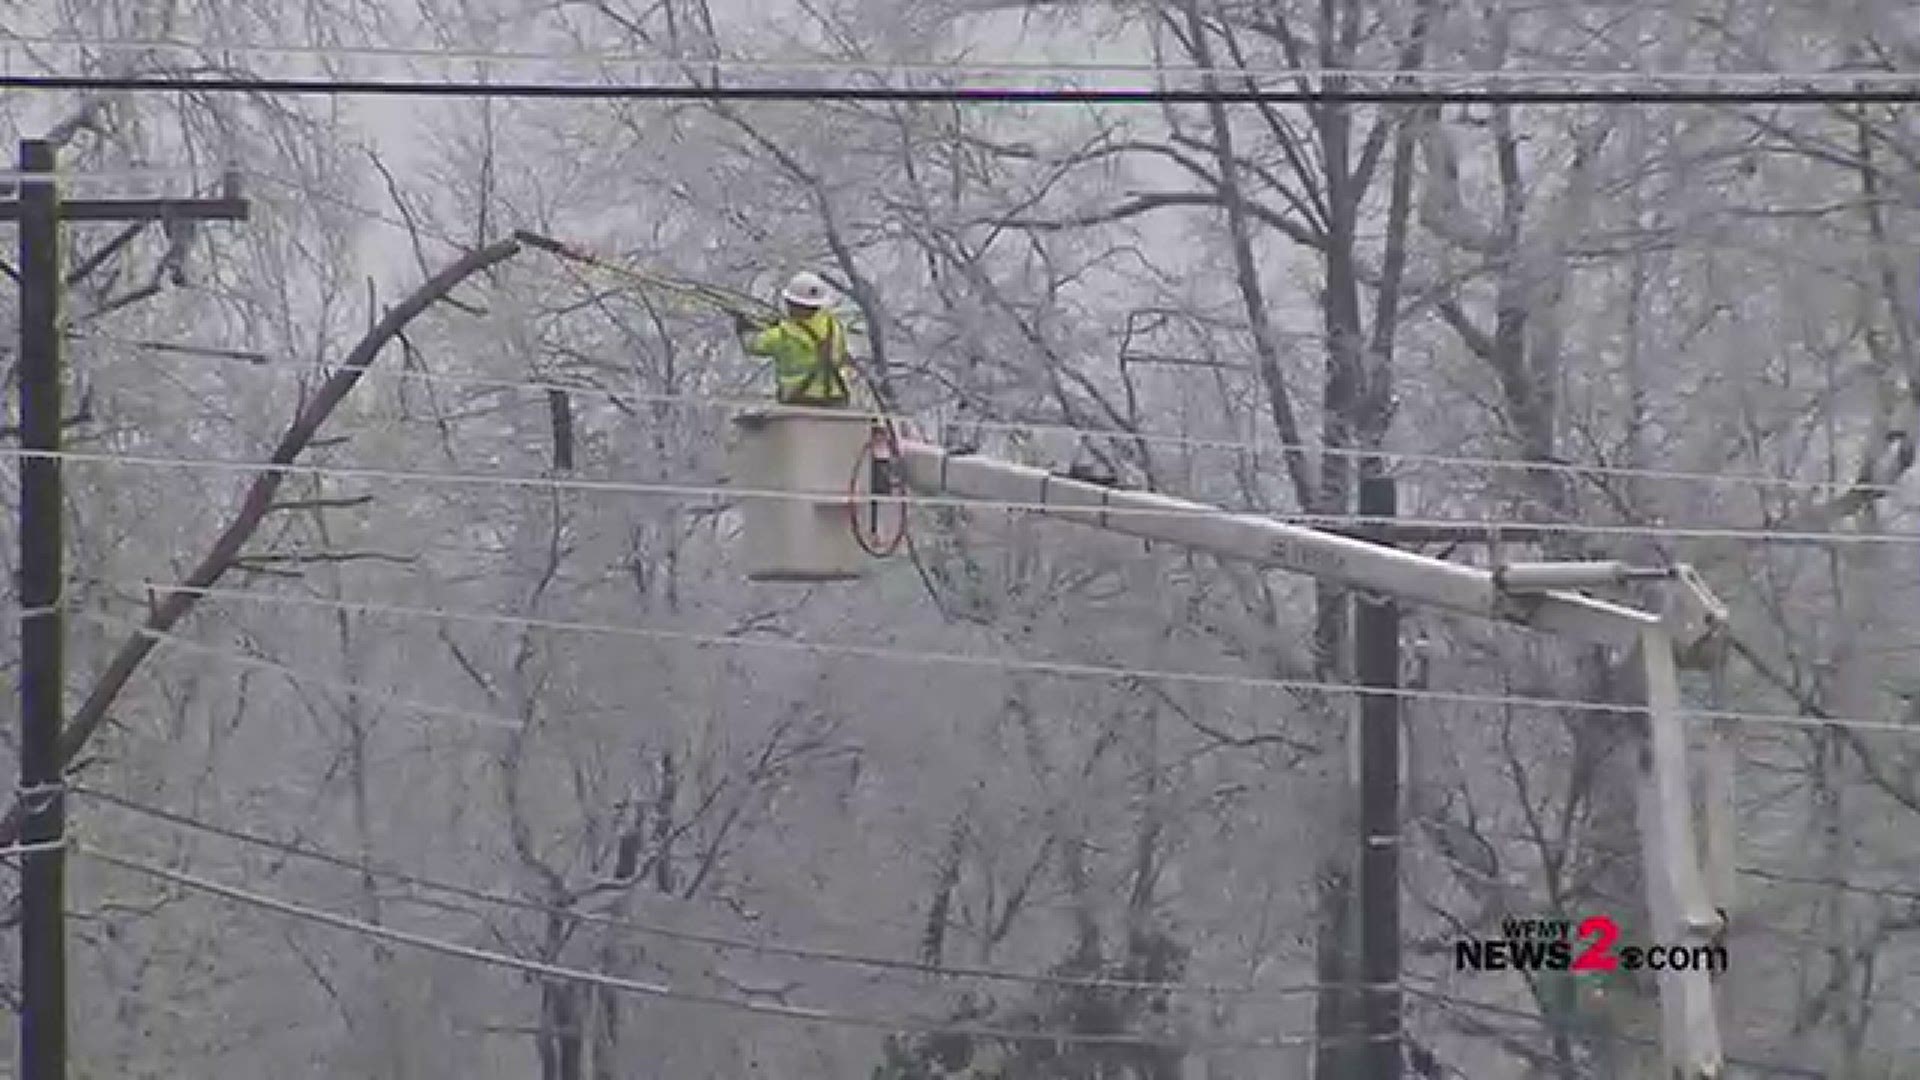 More than 55,000 are without power that’s down from more than 77,000 earlier today.